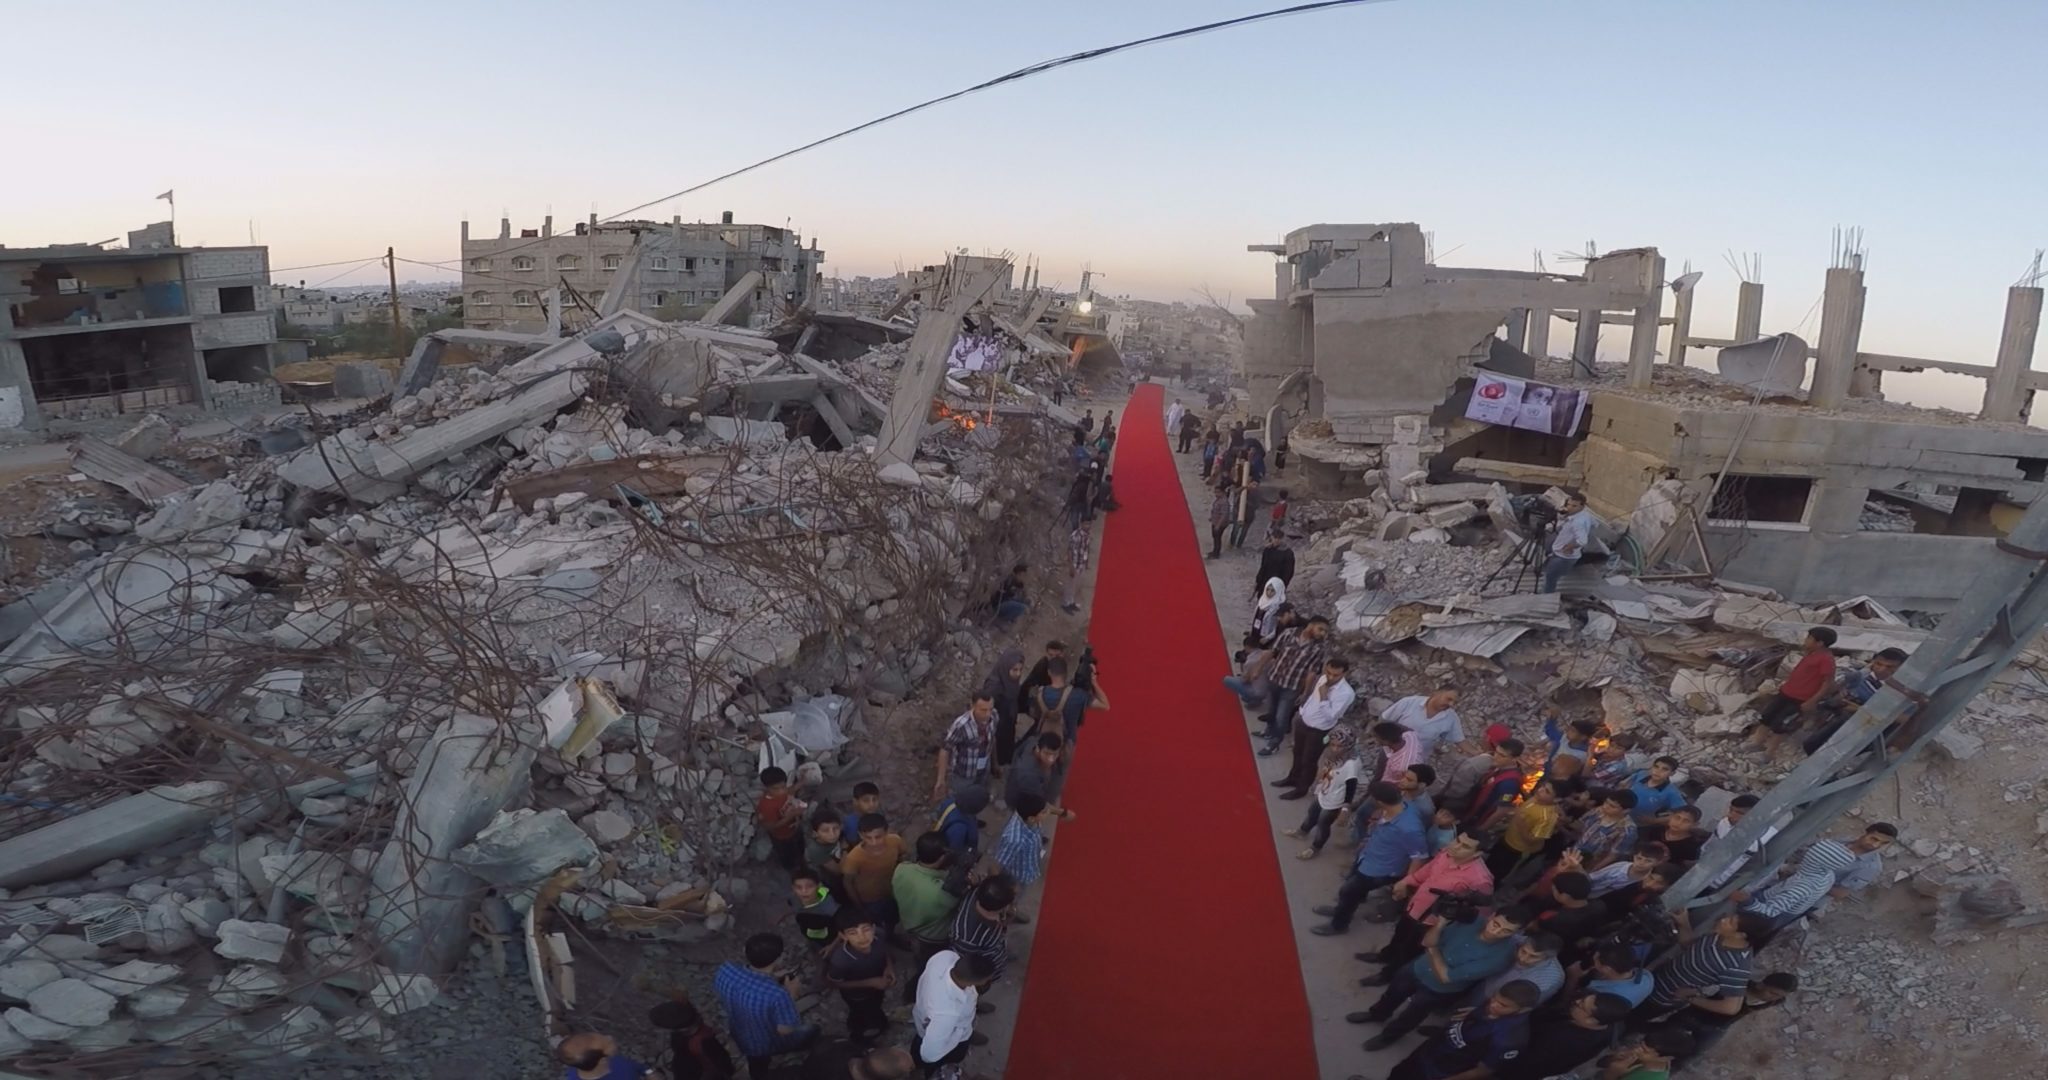 The Red Carpet Film Festival in Gaza in previous years.